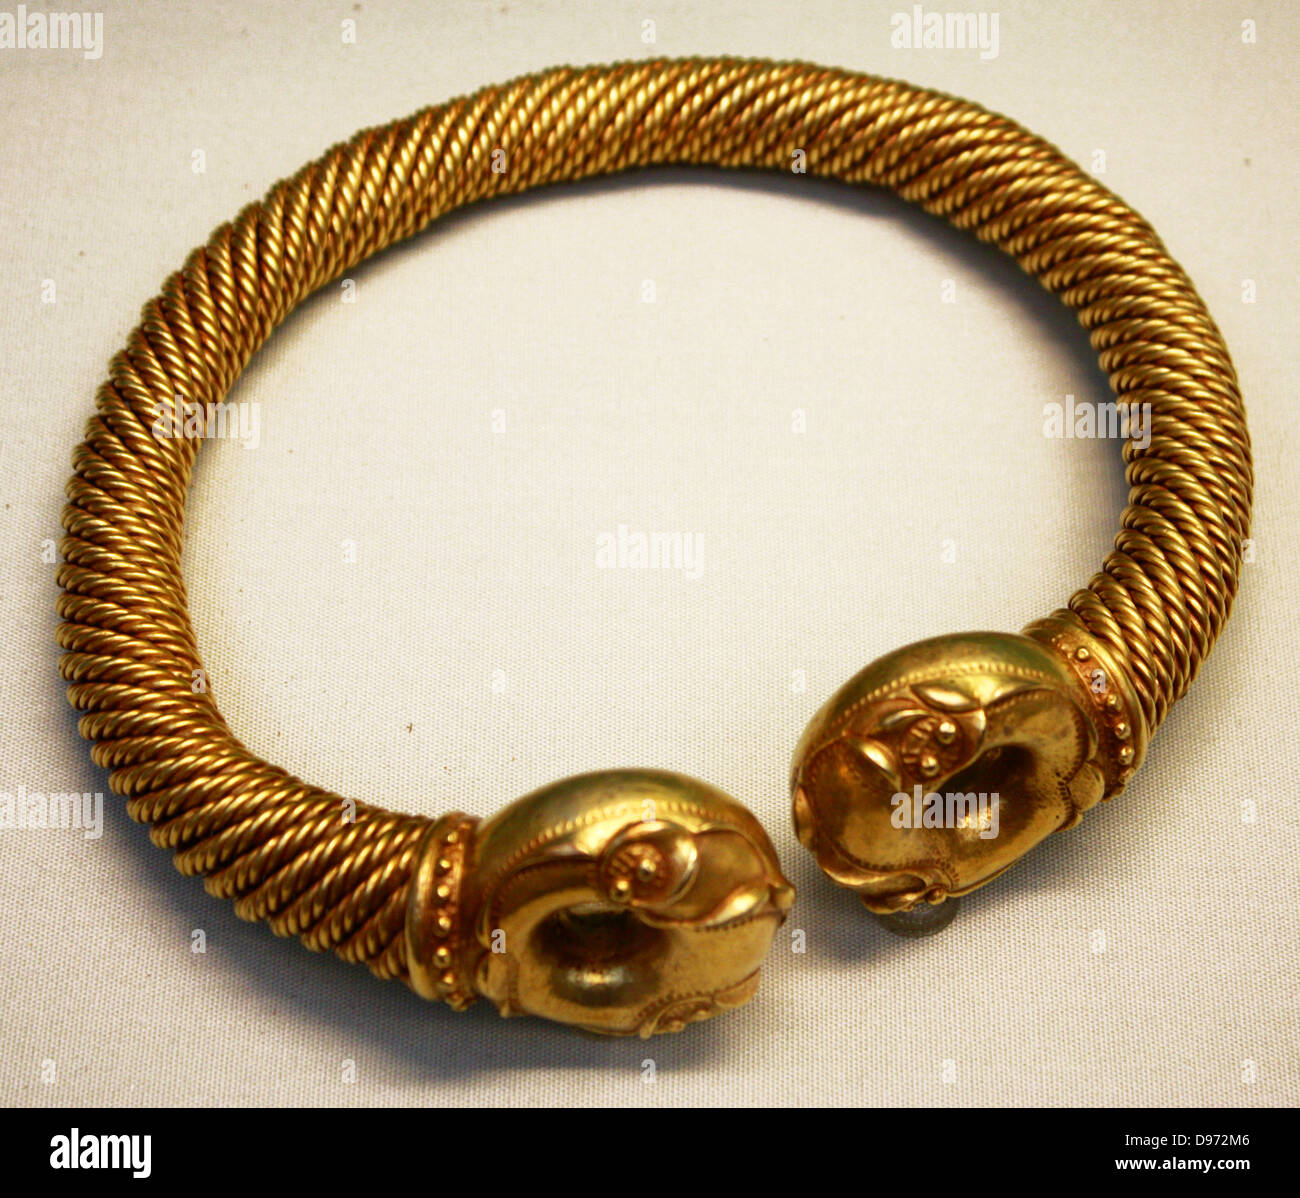 Gold and silver-alloy tore. Near Newark, Nottinghamshire. About 100-50 BC. This tore was discovered by a metal detectors' 2005. It is thought that it was deliberately placed in a specially dug hole, perhaps as an offering to the gods. Torcs were worn around the neck and were probably worn on a special occasions like a mayoral chain. Stock Photo